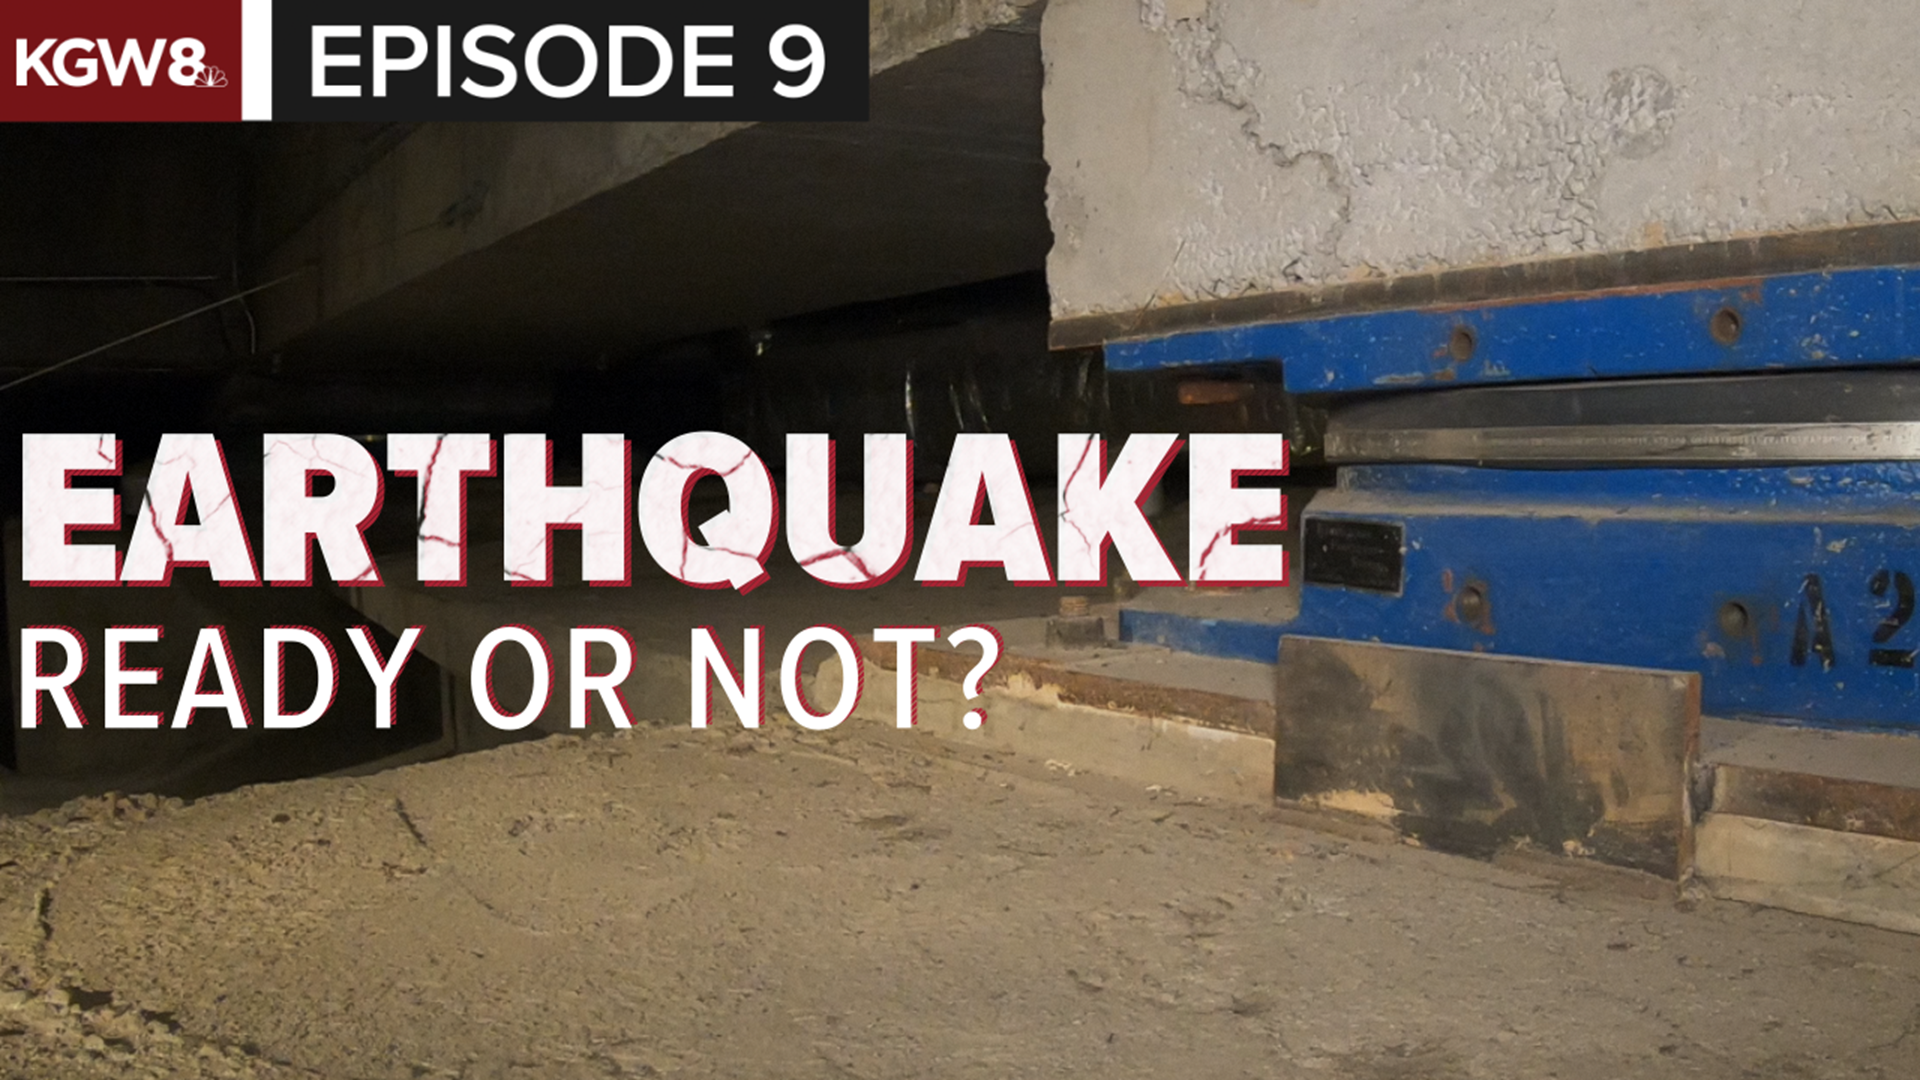 Ever wonder how some buildings stay upright during an earthquake? Here's a look at how some structures are built or retrofitted to withstand the violent shaking.